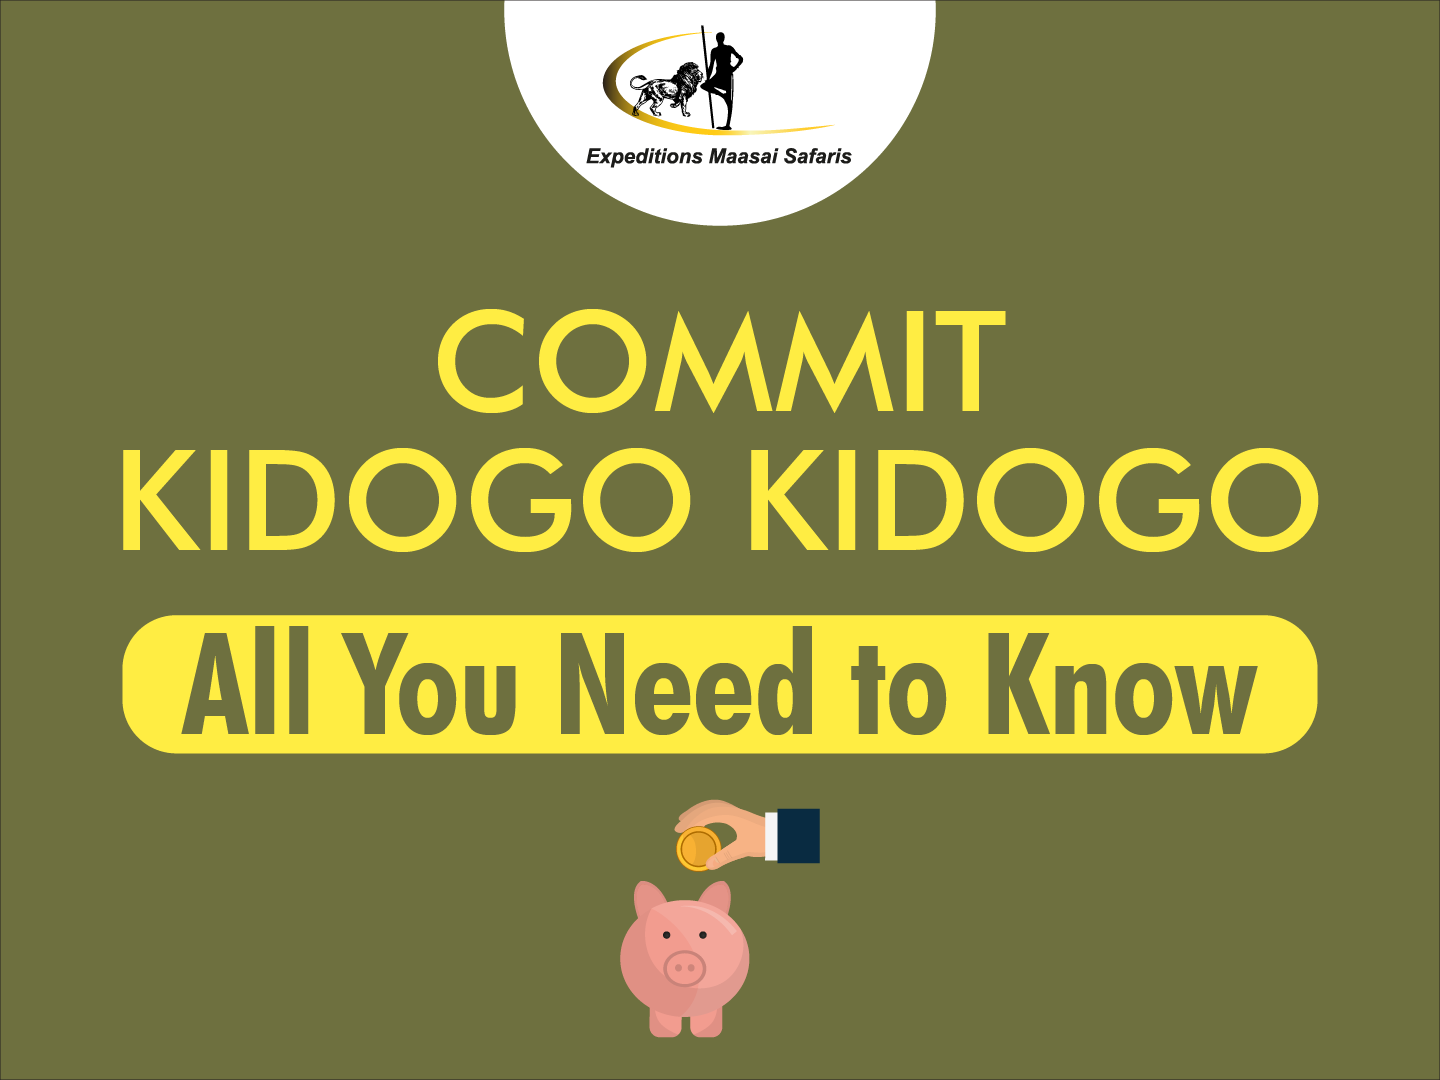 Commit Kidogo Kidogo is a flexible holiday payment plan provided by Expeditions Maasai Safaris. It enables all our customers to pay for their dream holidays in installments. 